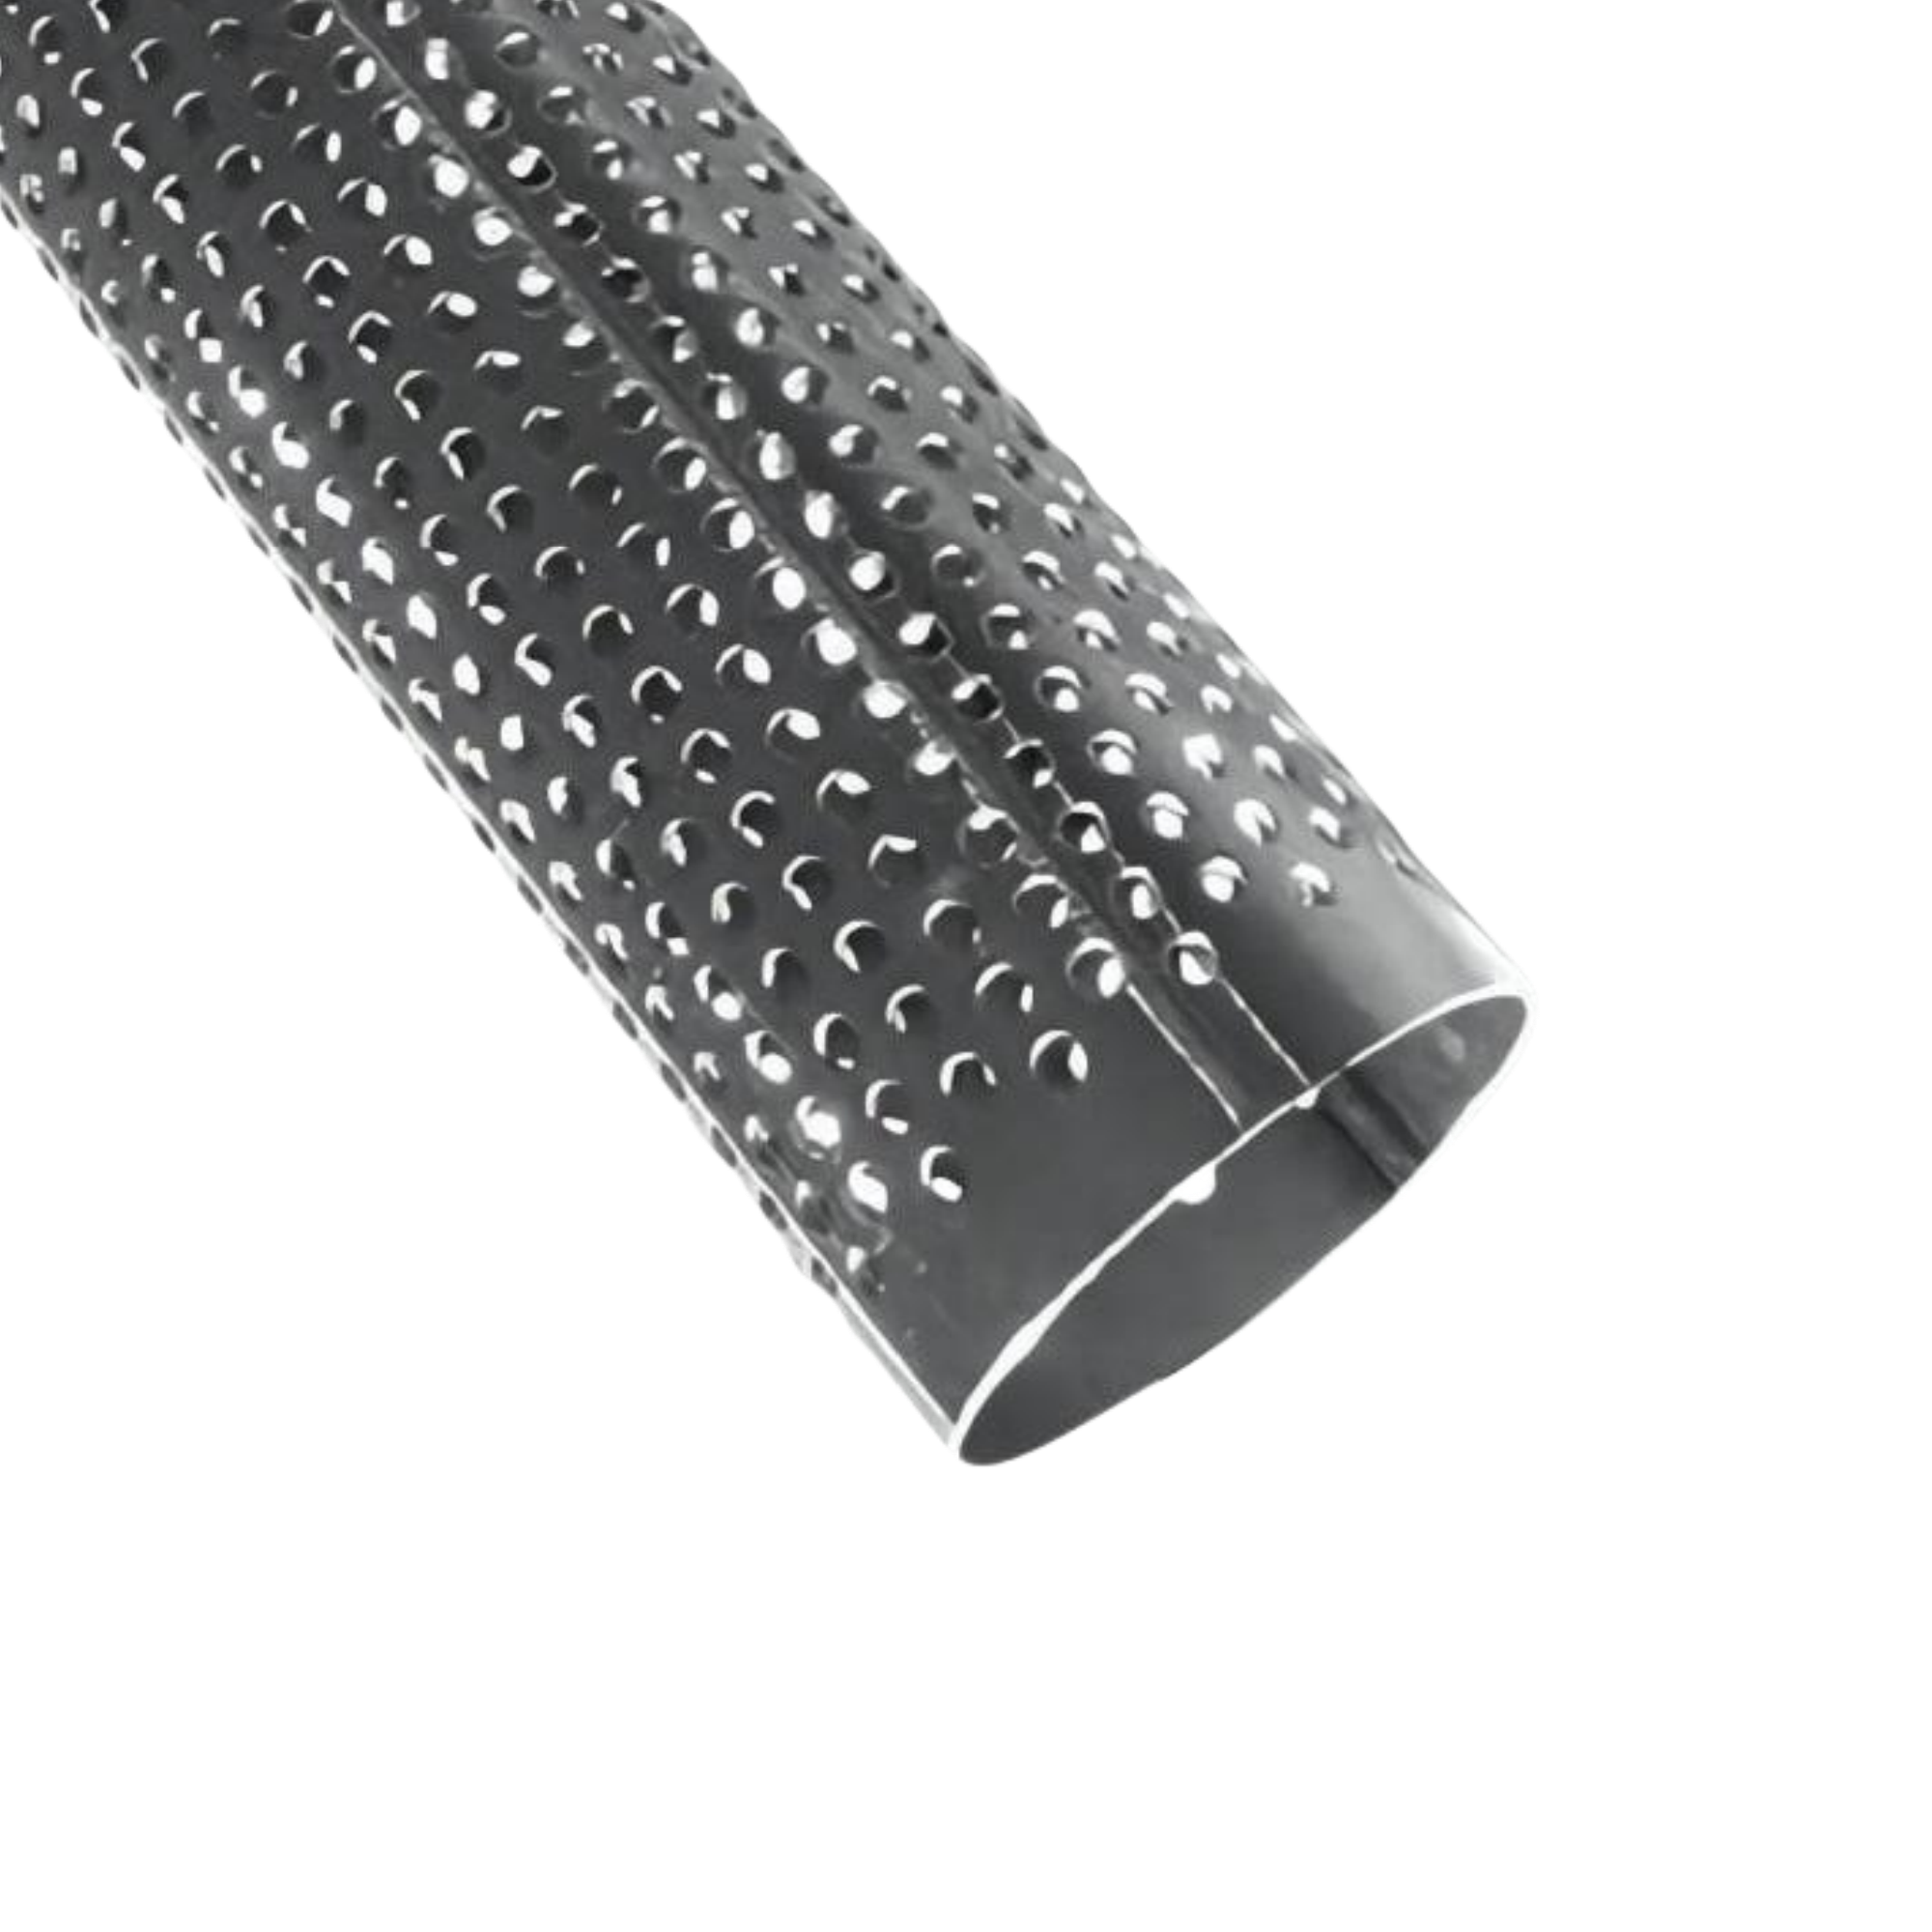 perforated stainless steel tube